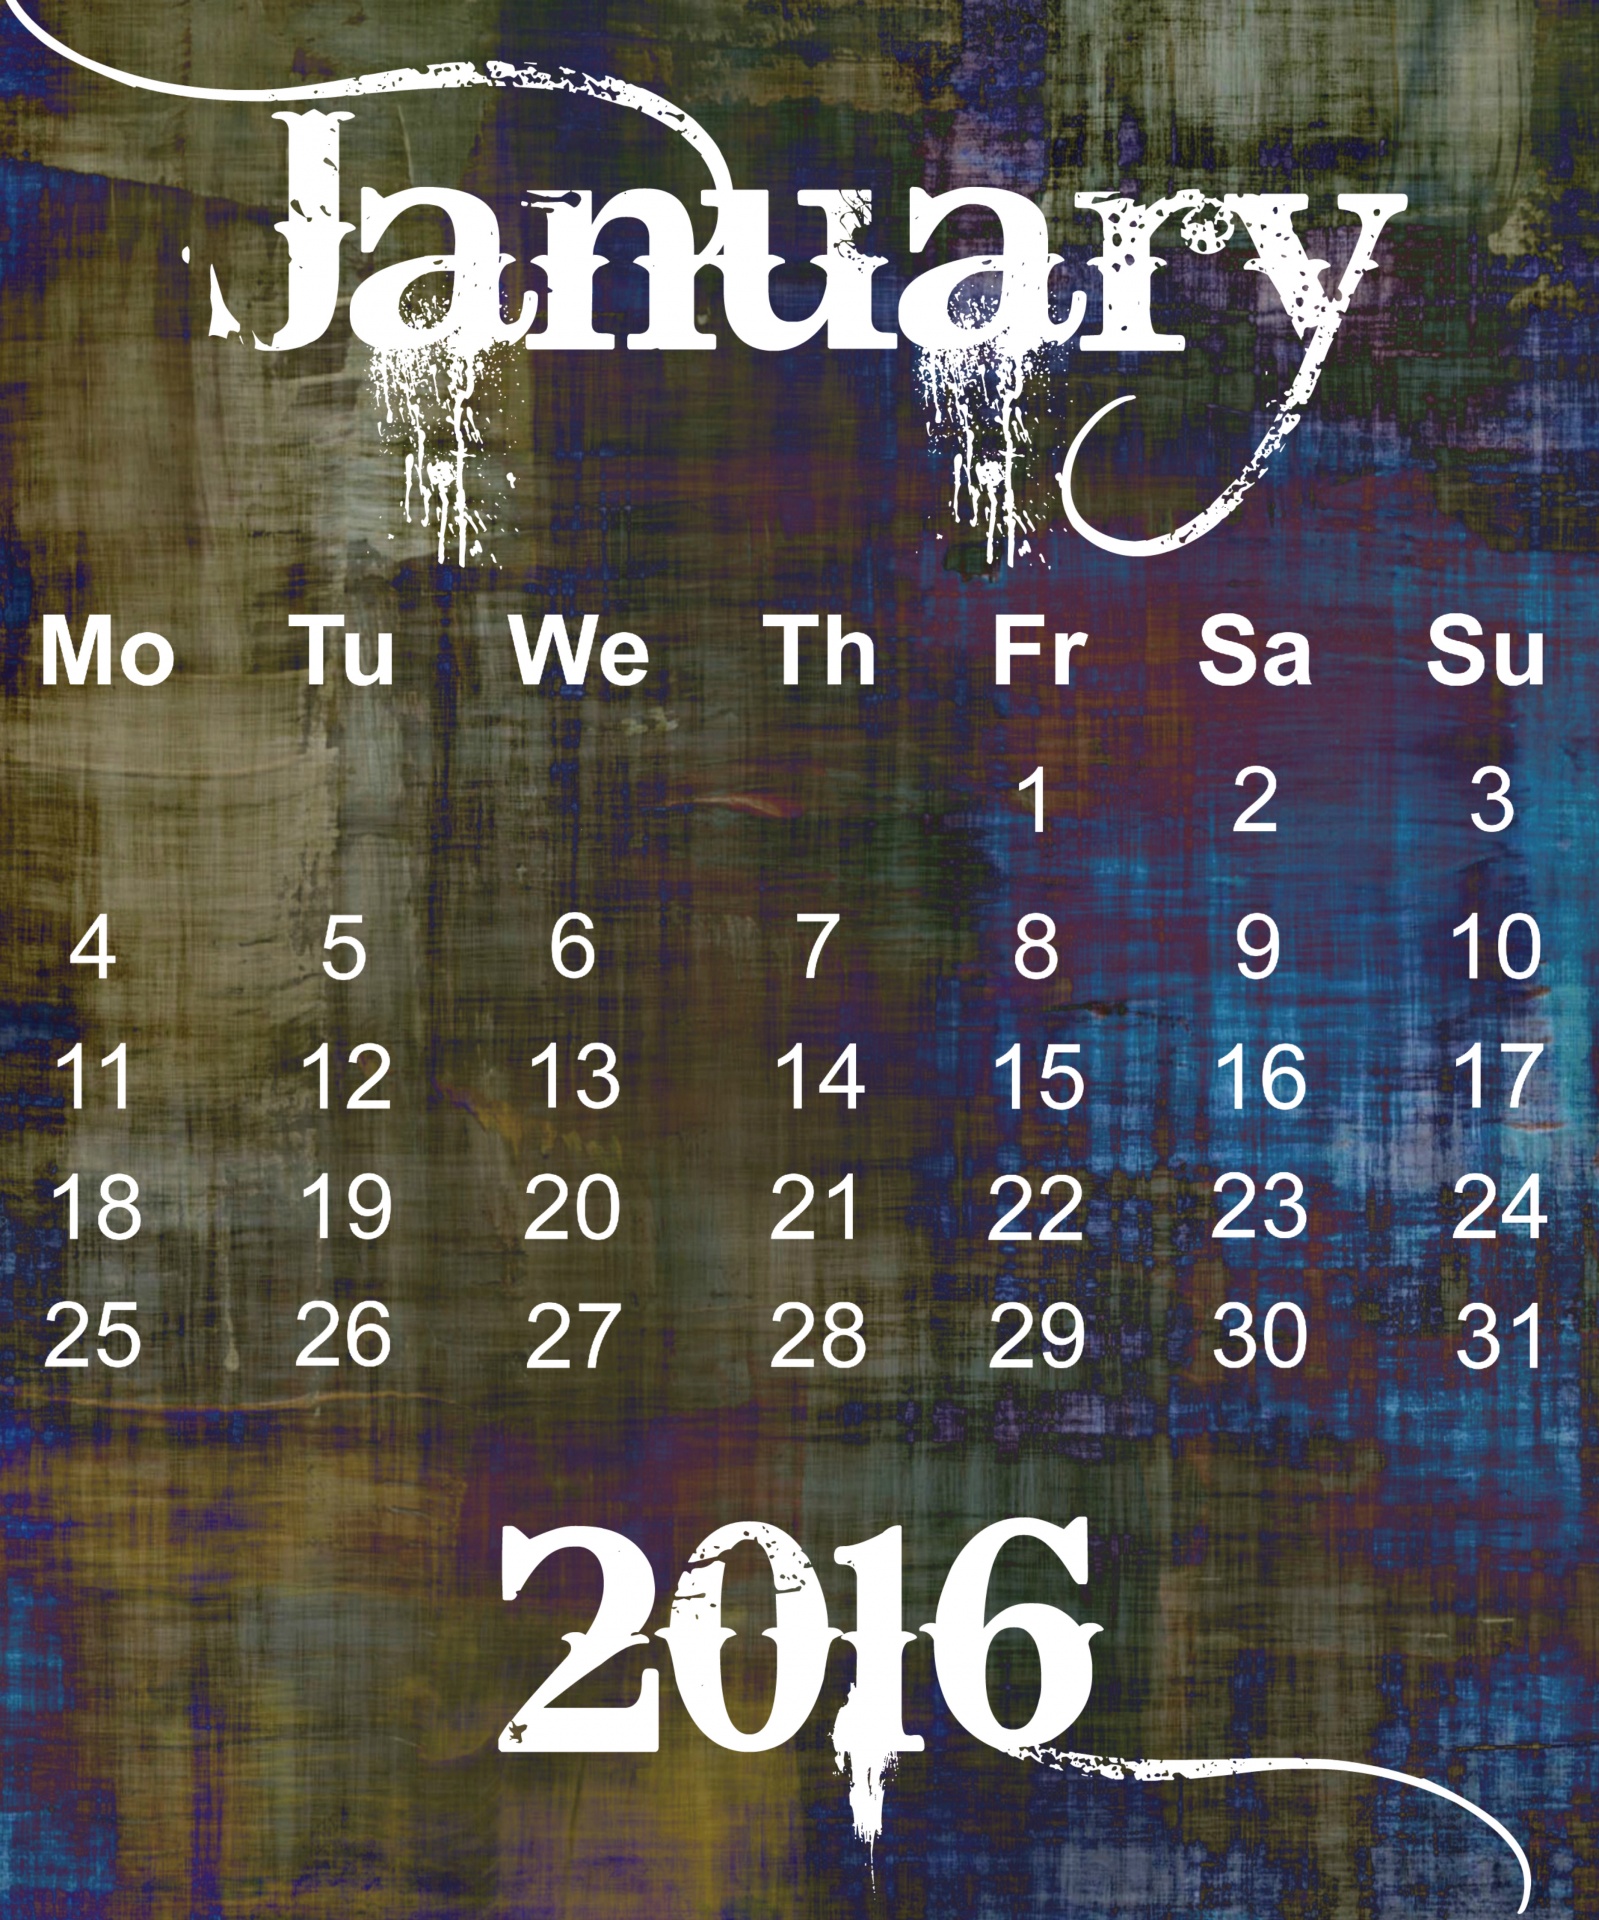 january-2016-grunge-calendar-free-stock-photo-public-domain-pictures